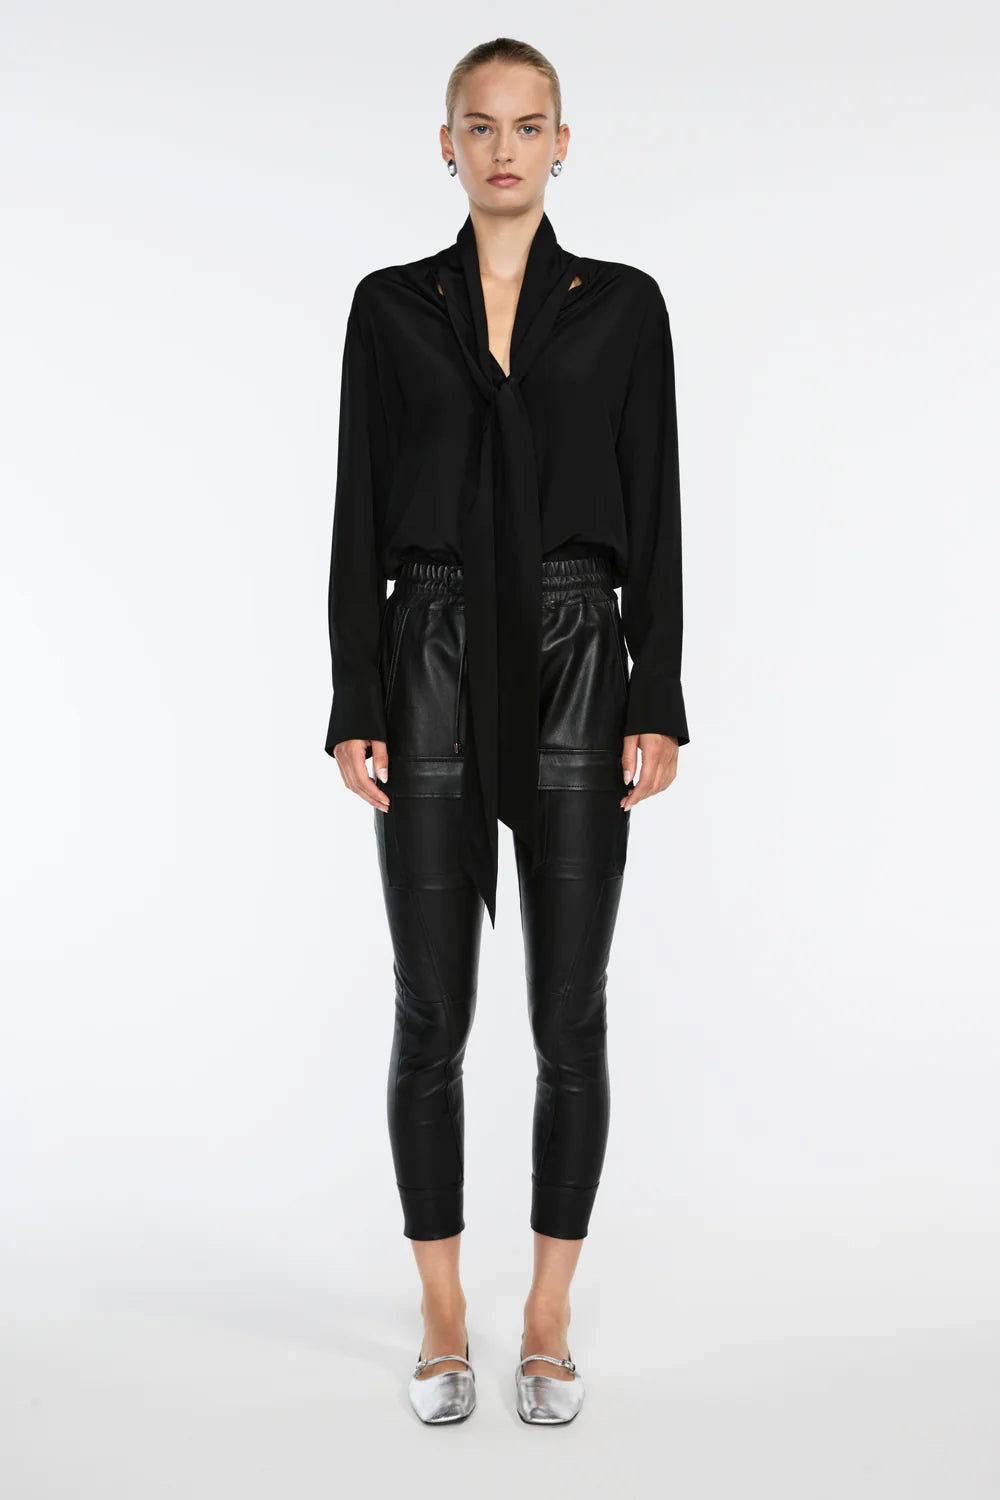 MANNING CARTELL Leather Pant